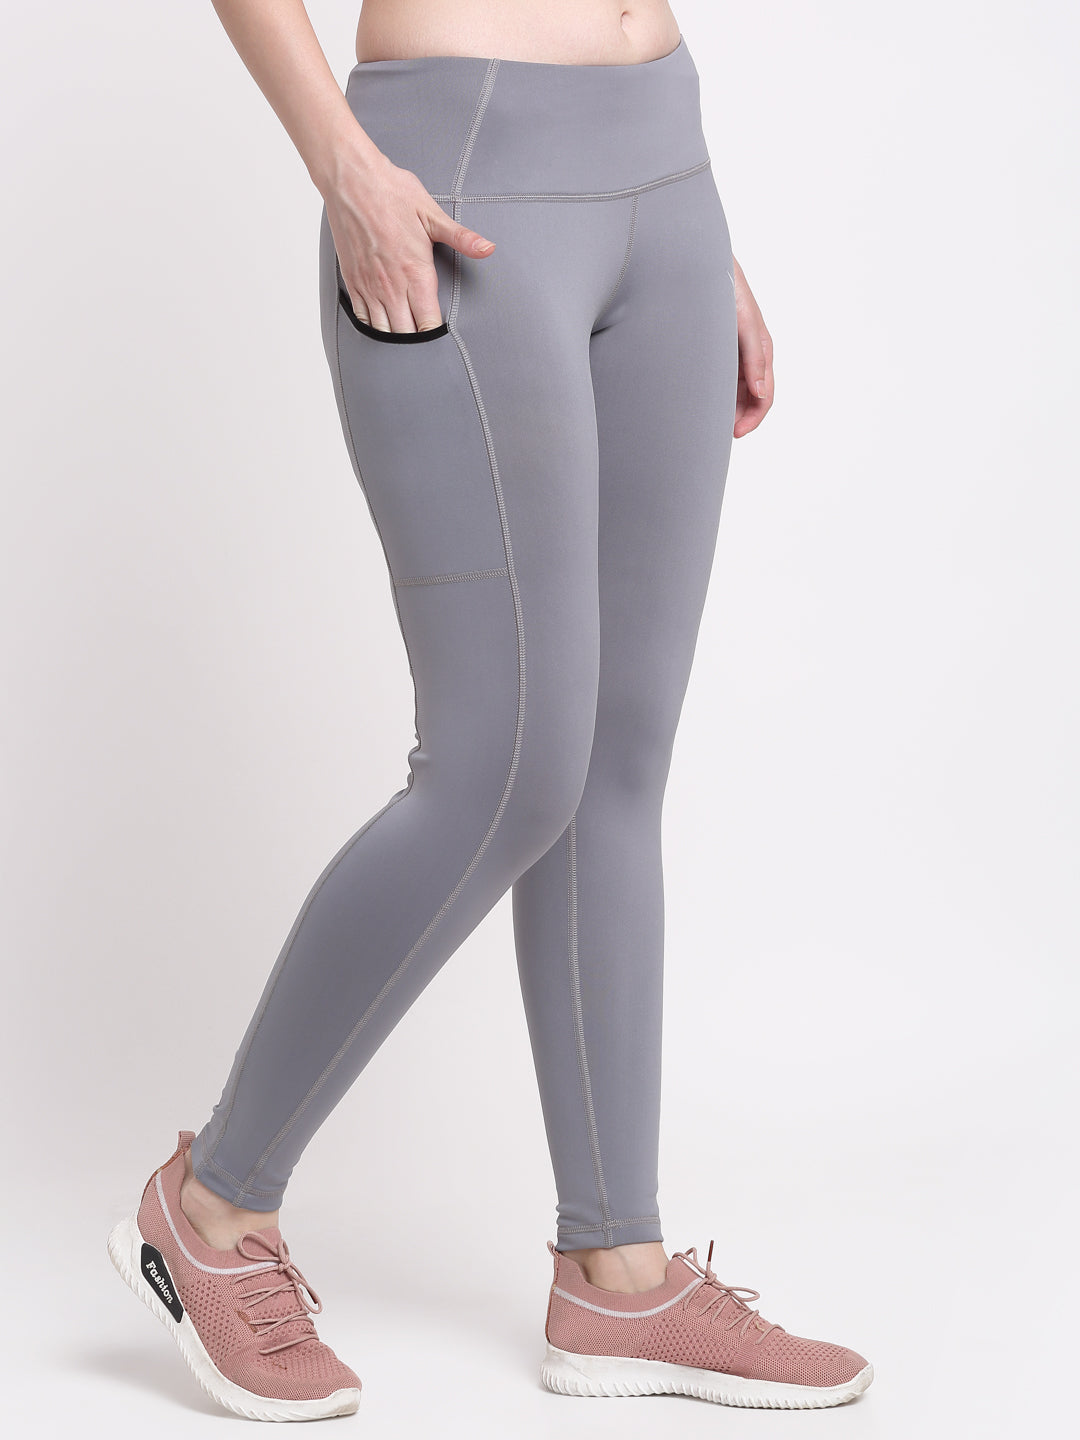 Invincible Women's Training Legging With Side Pocket